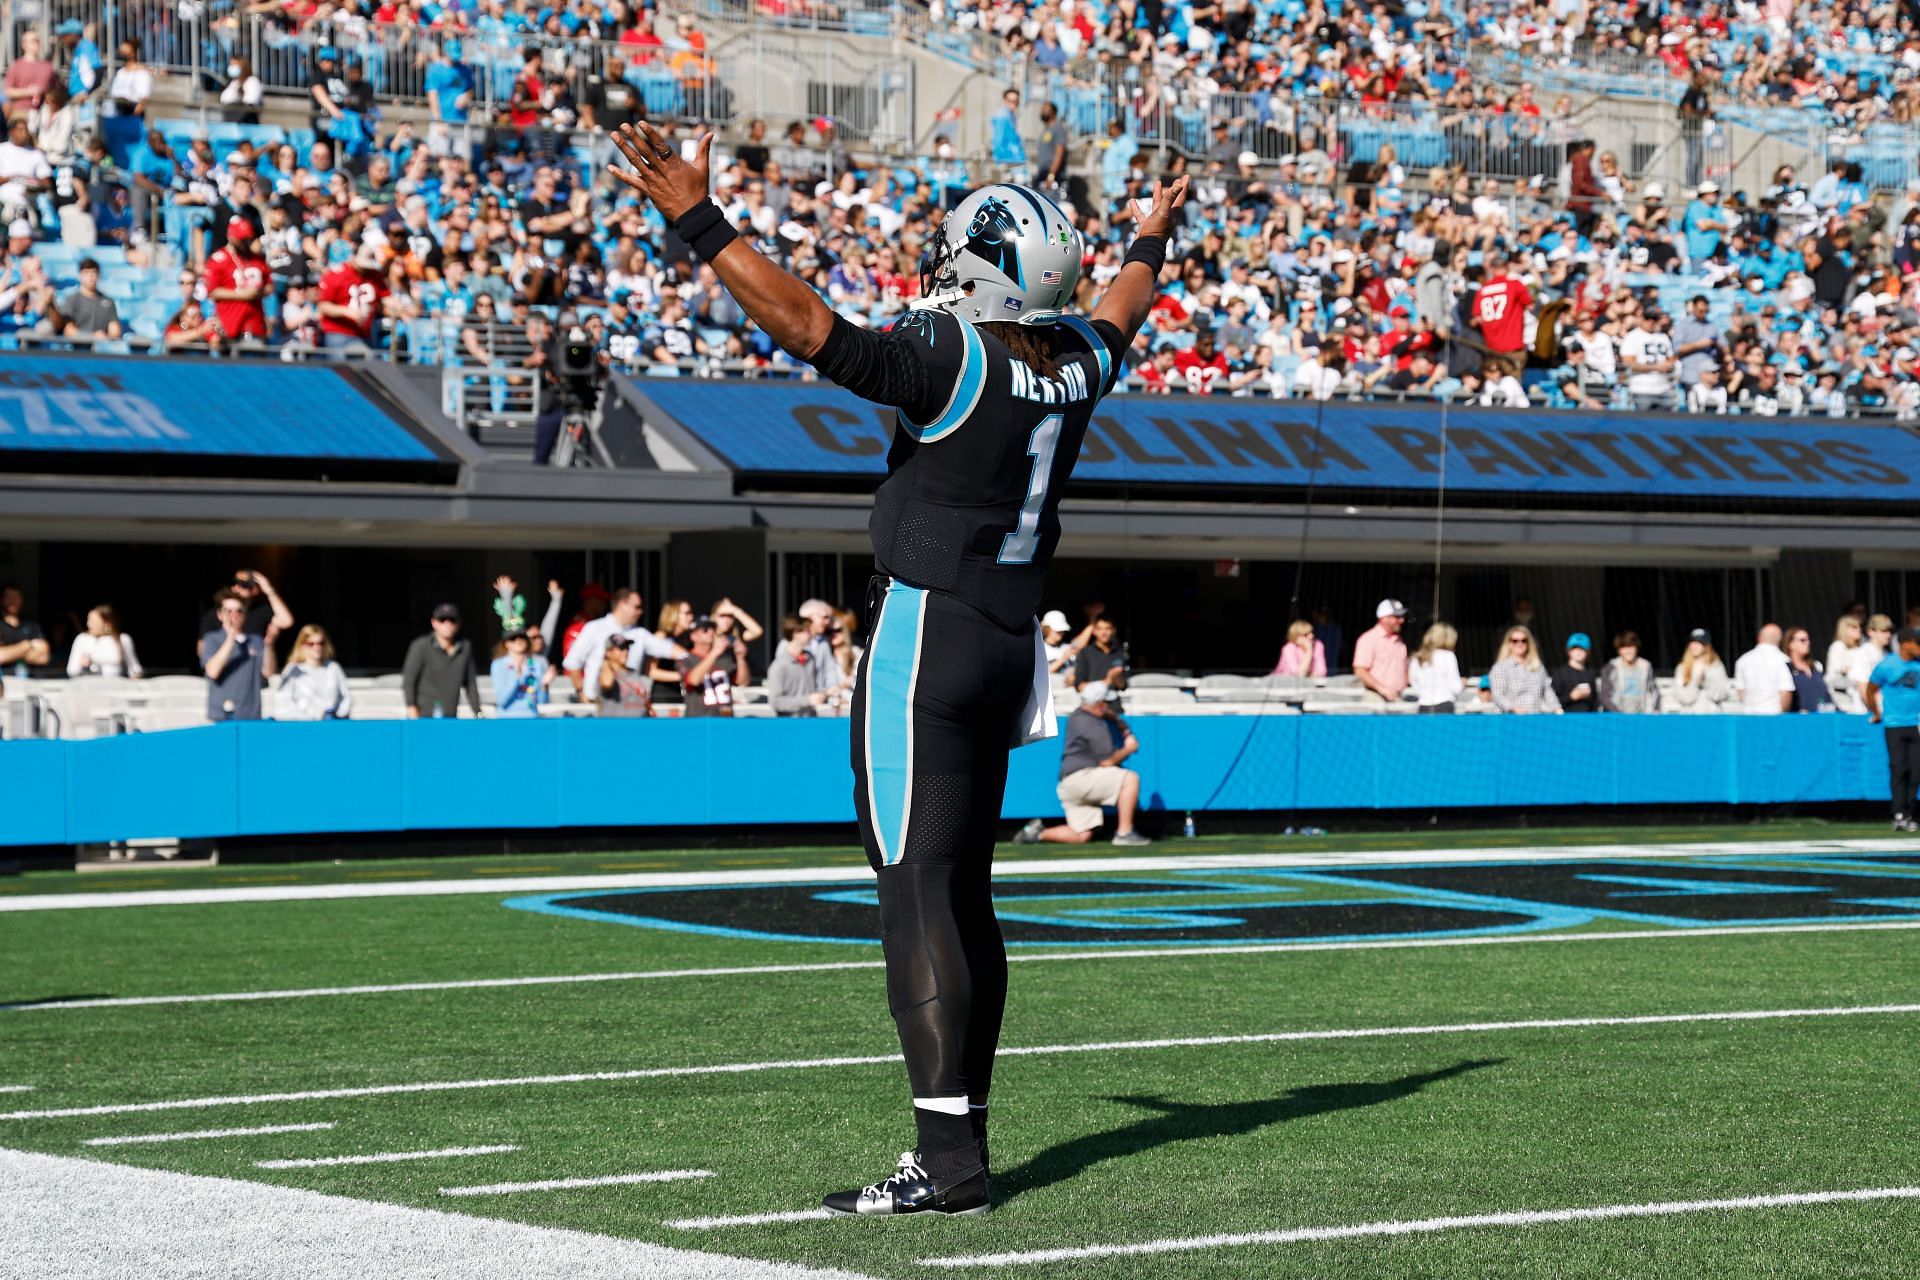 Will Cam Newton be back in action this season with Carolina Panthers?